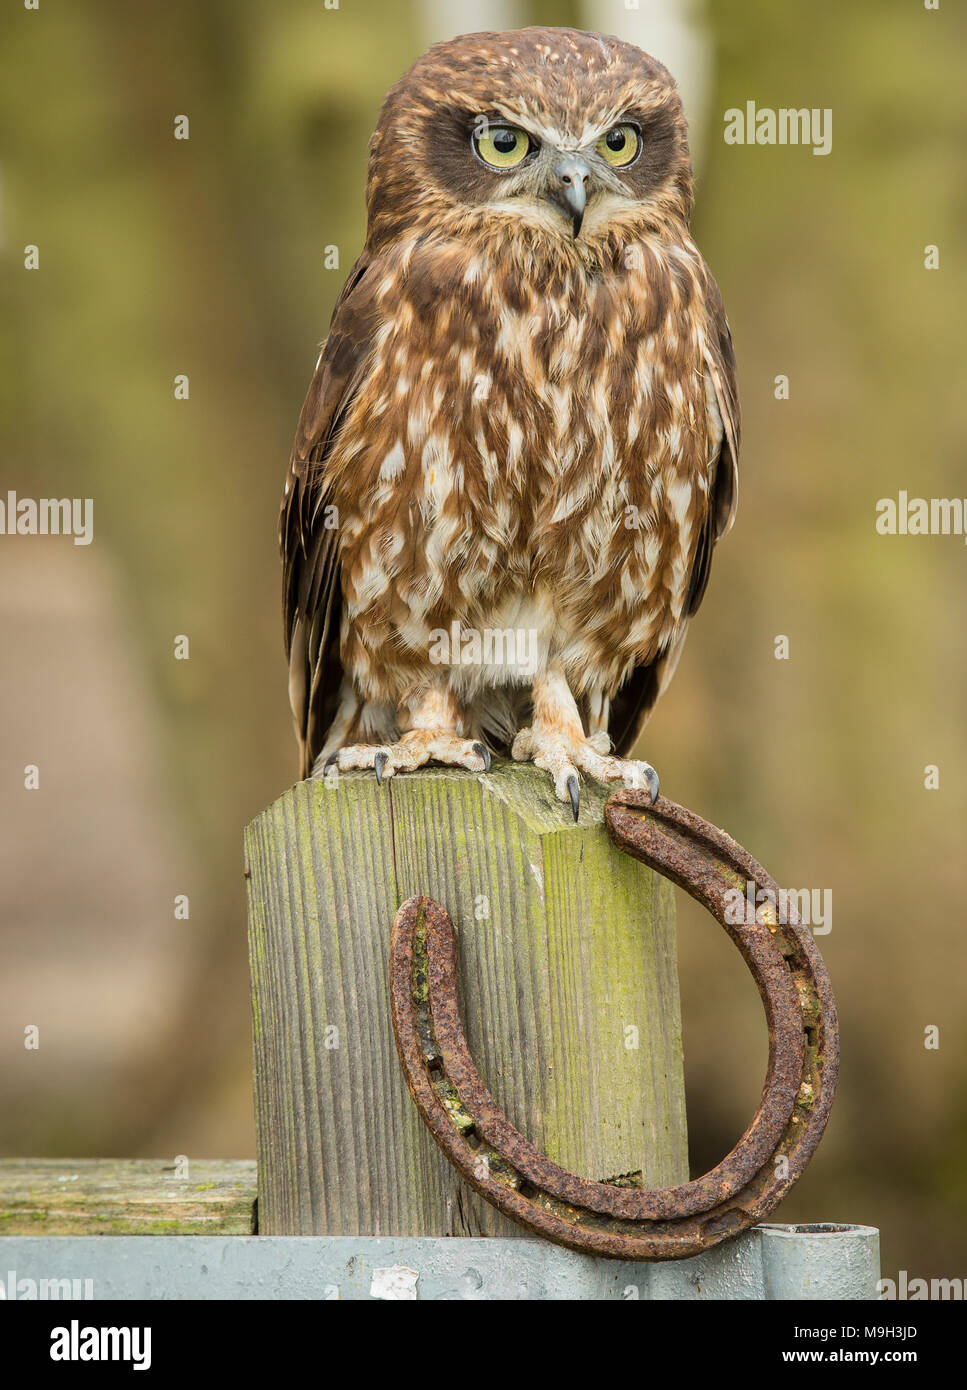 Boobook Owl, a native of Australia, this brown owl is perched on a farm gate post with lucky horse shoe.  Facing forward.  Portrait.  Copy space Stock Photo